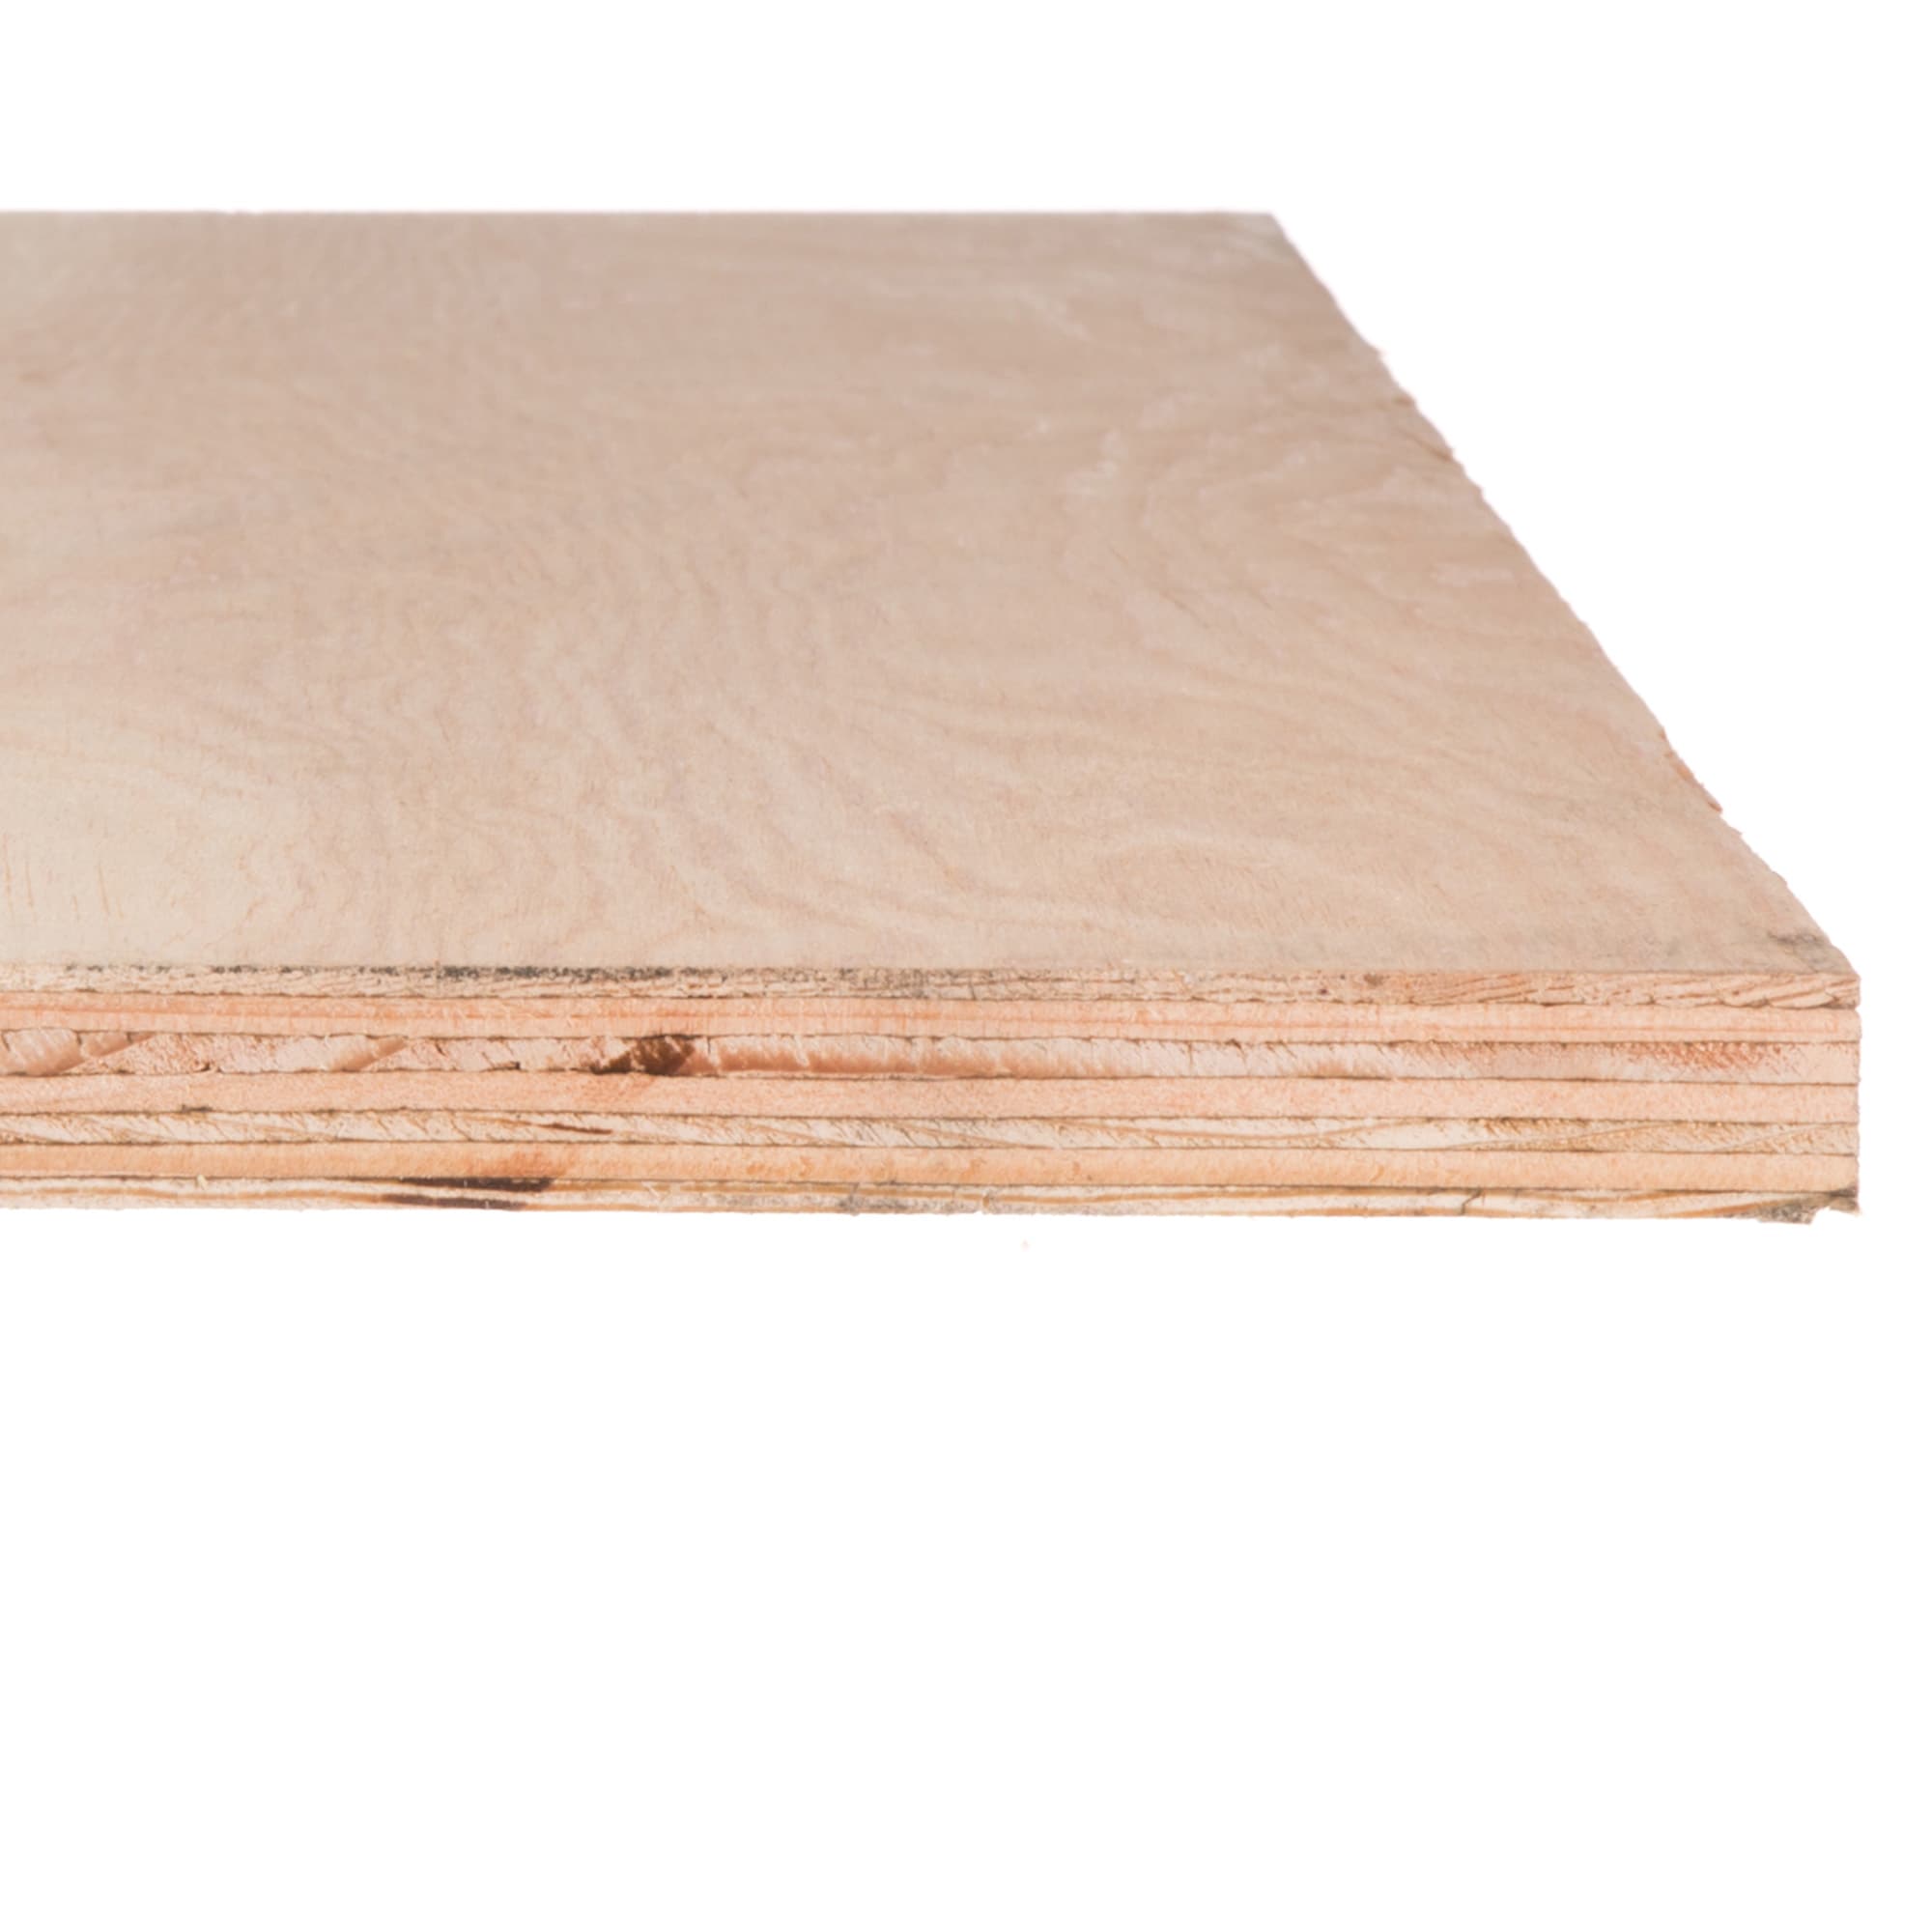 3/4 Inch Airated Plywood 4x8 Sheets Cabinet Material for Sale in